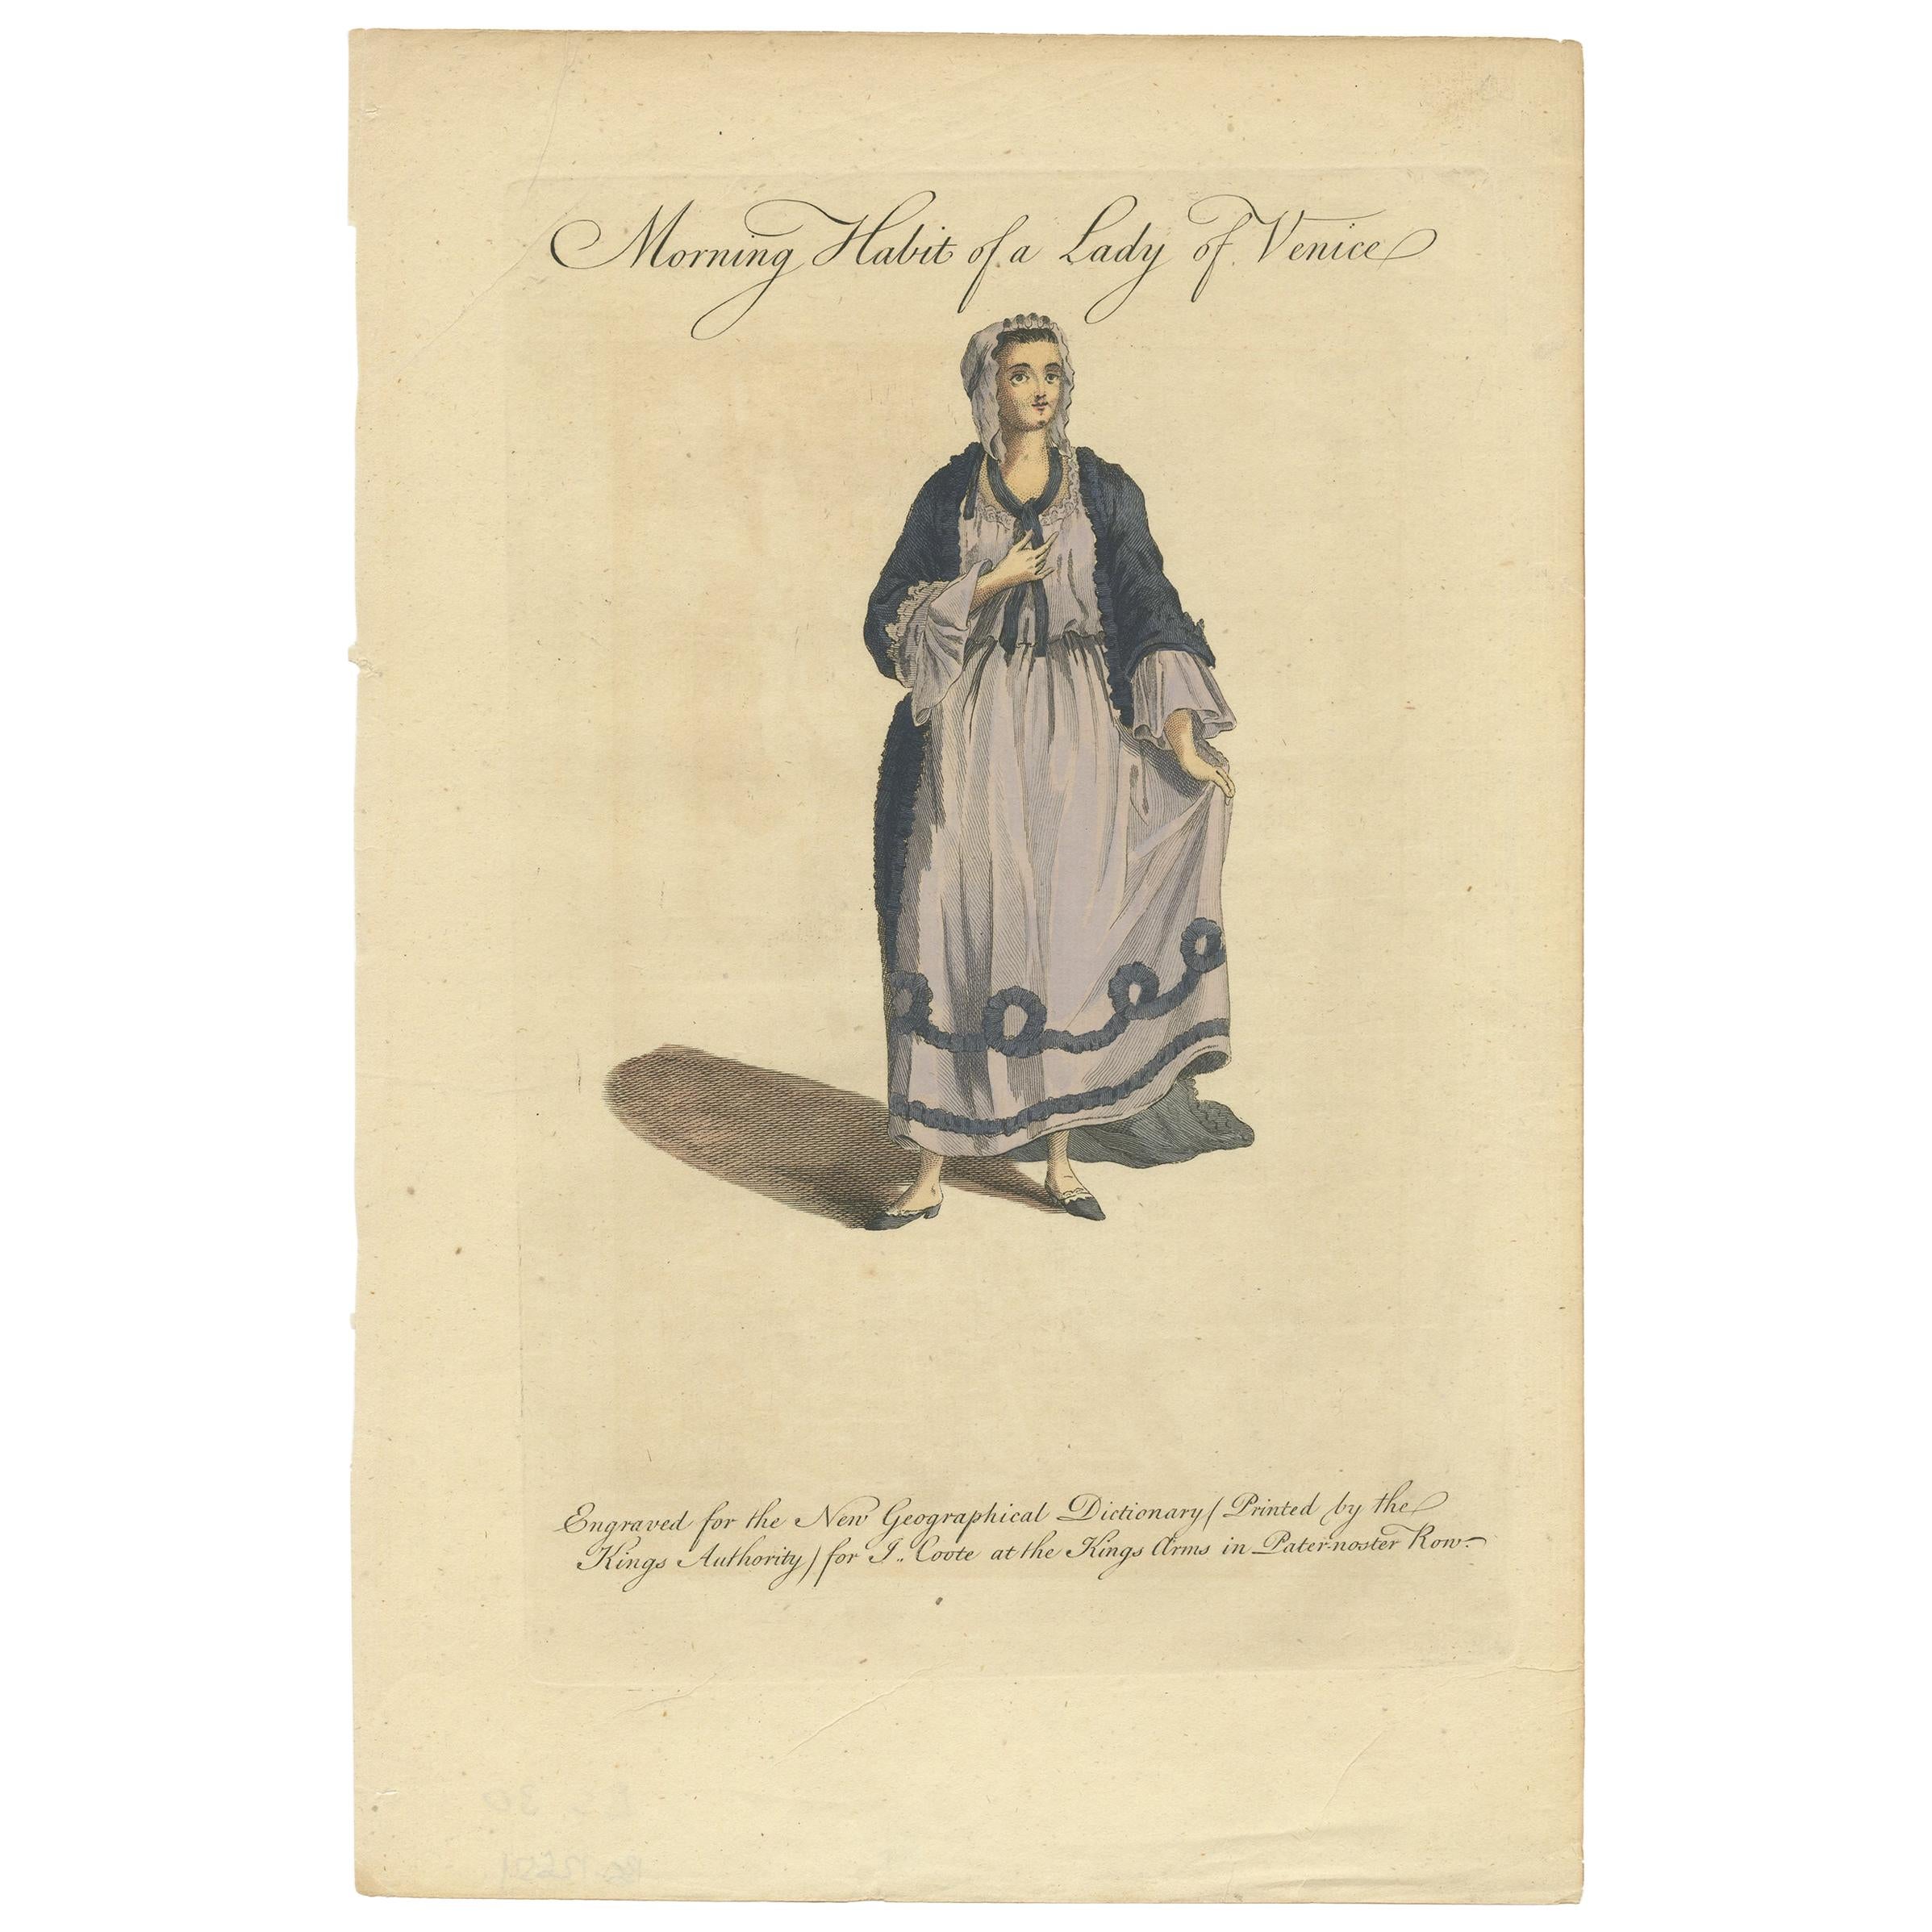 Antique Costume Print of the Morning Habit of a Lady of Venice by Coote 'c.1760'